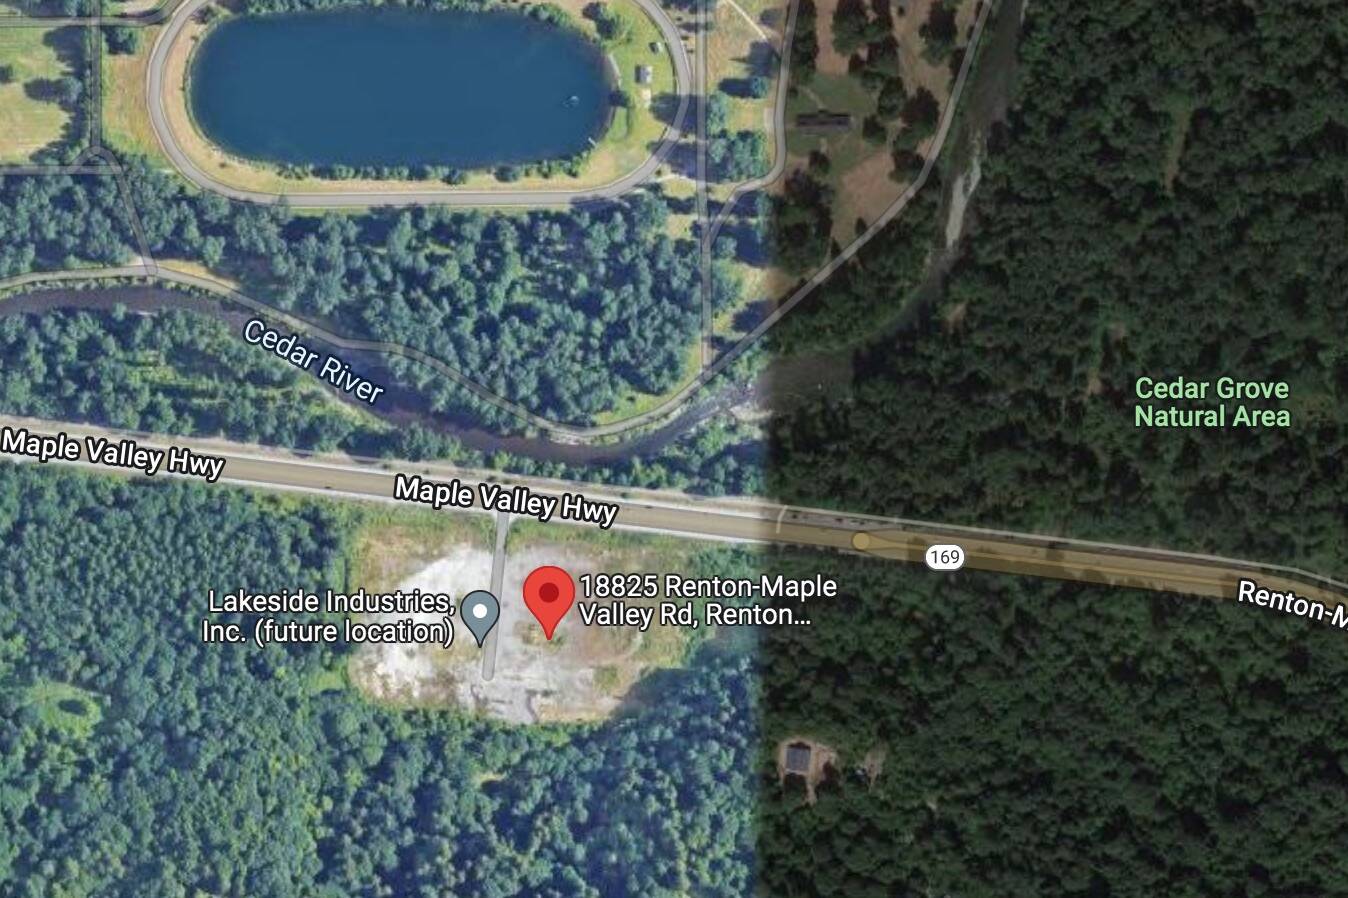 Location of proposed asphalt plant on State Route 169 (Google Maps screenshot)